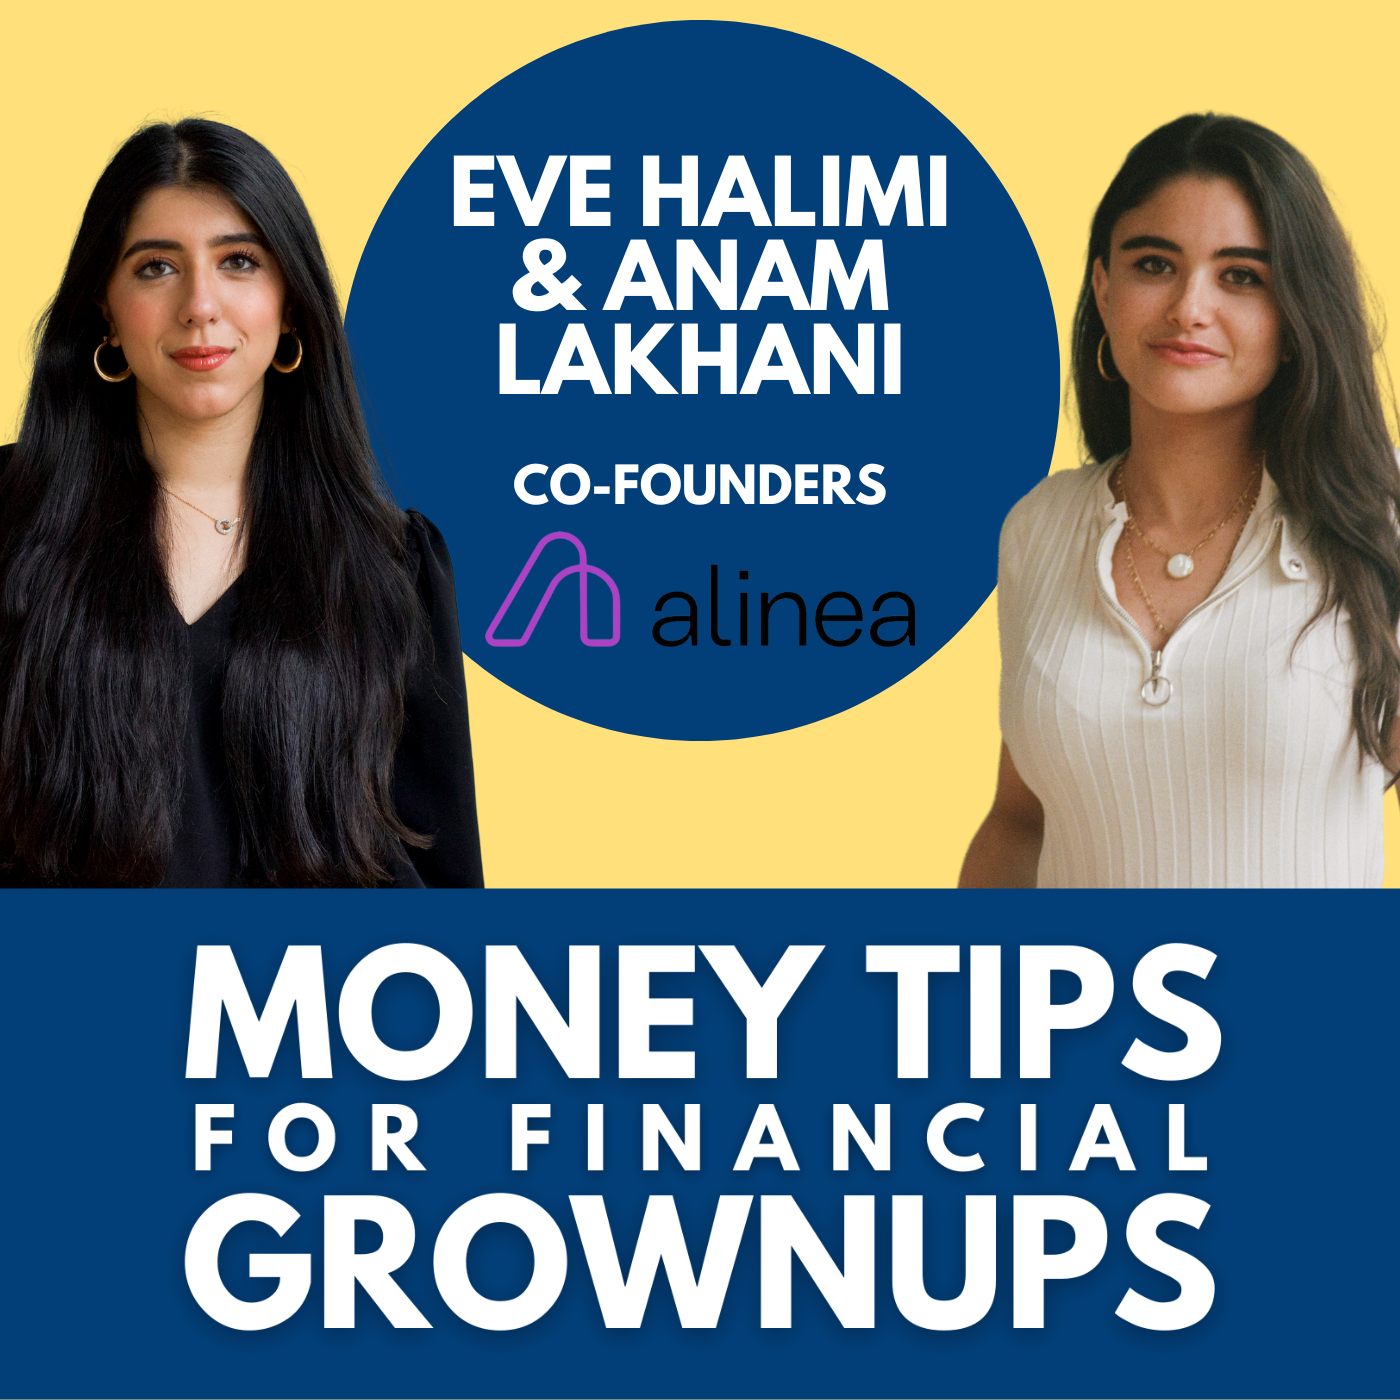 Women Entrepreneurs — Money Tips for Financial Grownups podcast show notes and transcripts Bobbi Rebell Financial Grownup + GrownupGear Bobbi Rebell CFP® pic